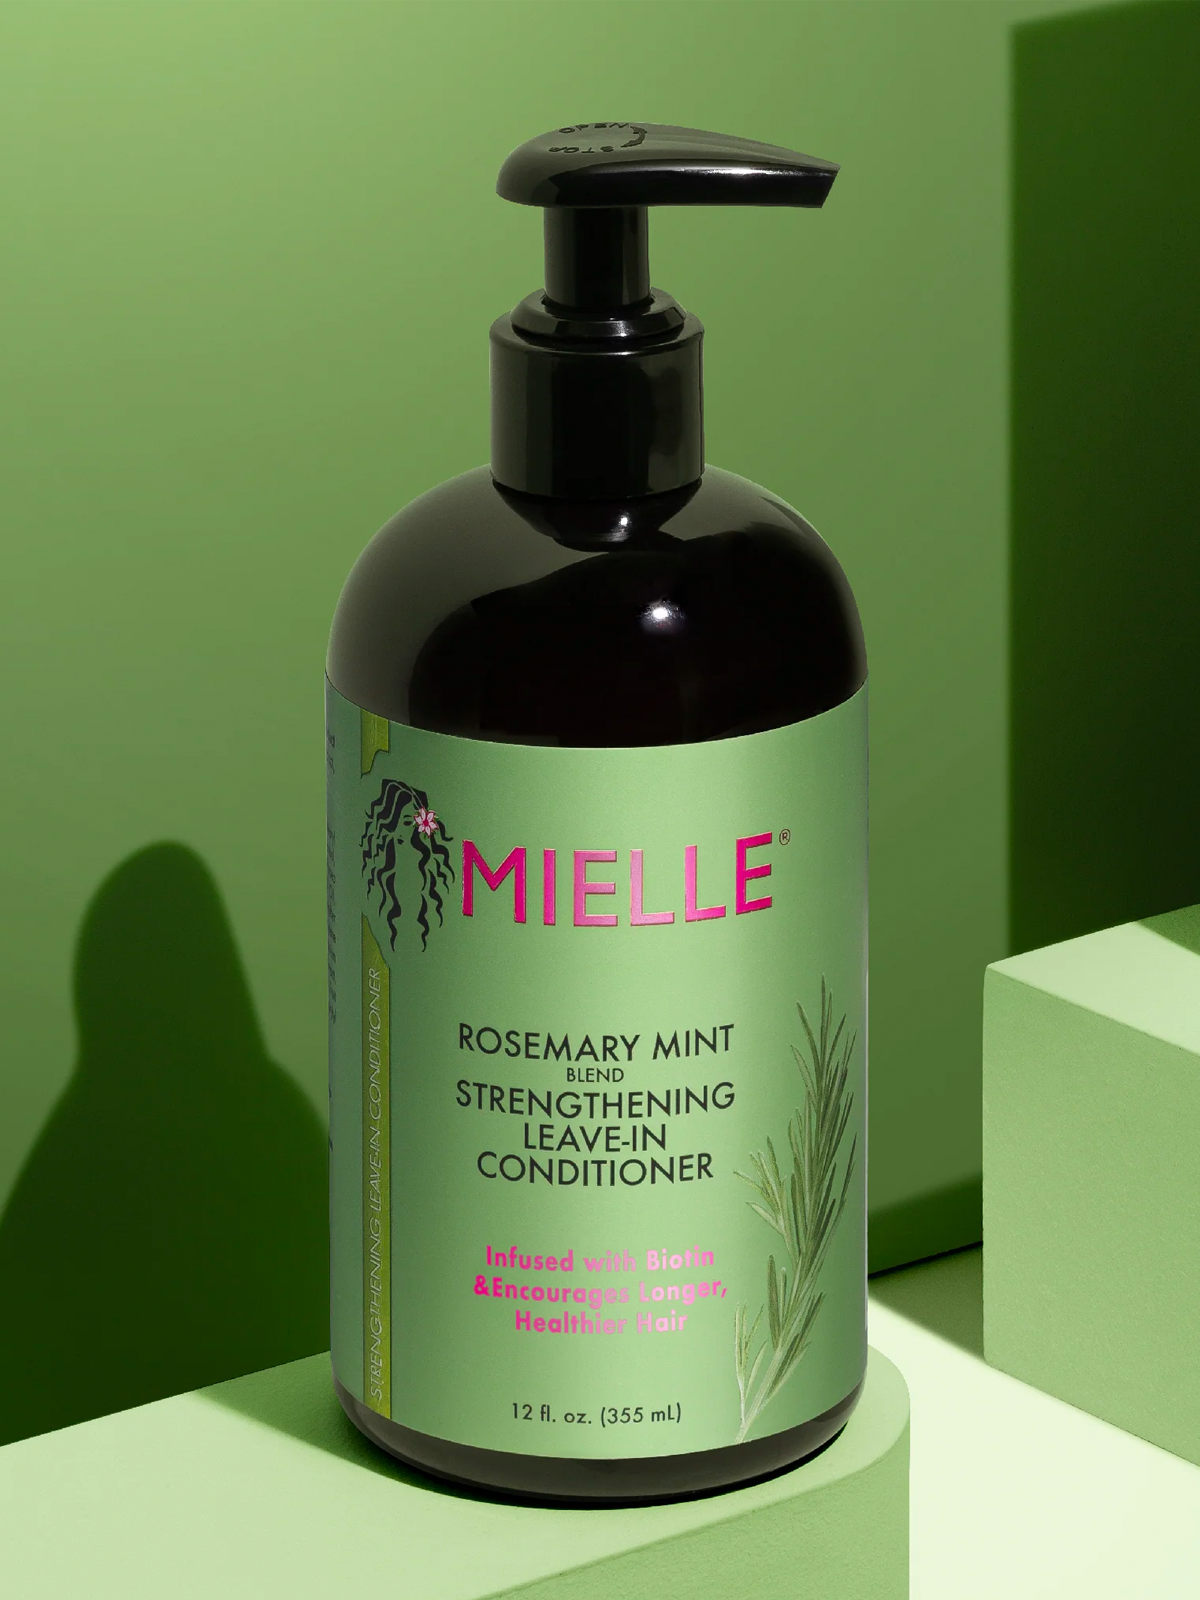 Mielle – Rosemary Mint Strengthening Leave-In Conditioner